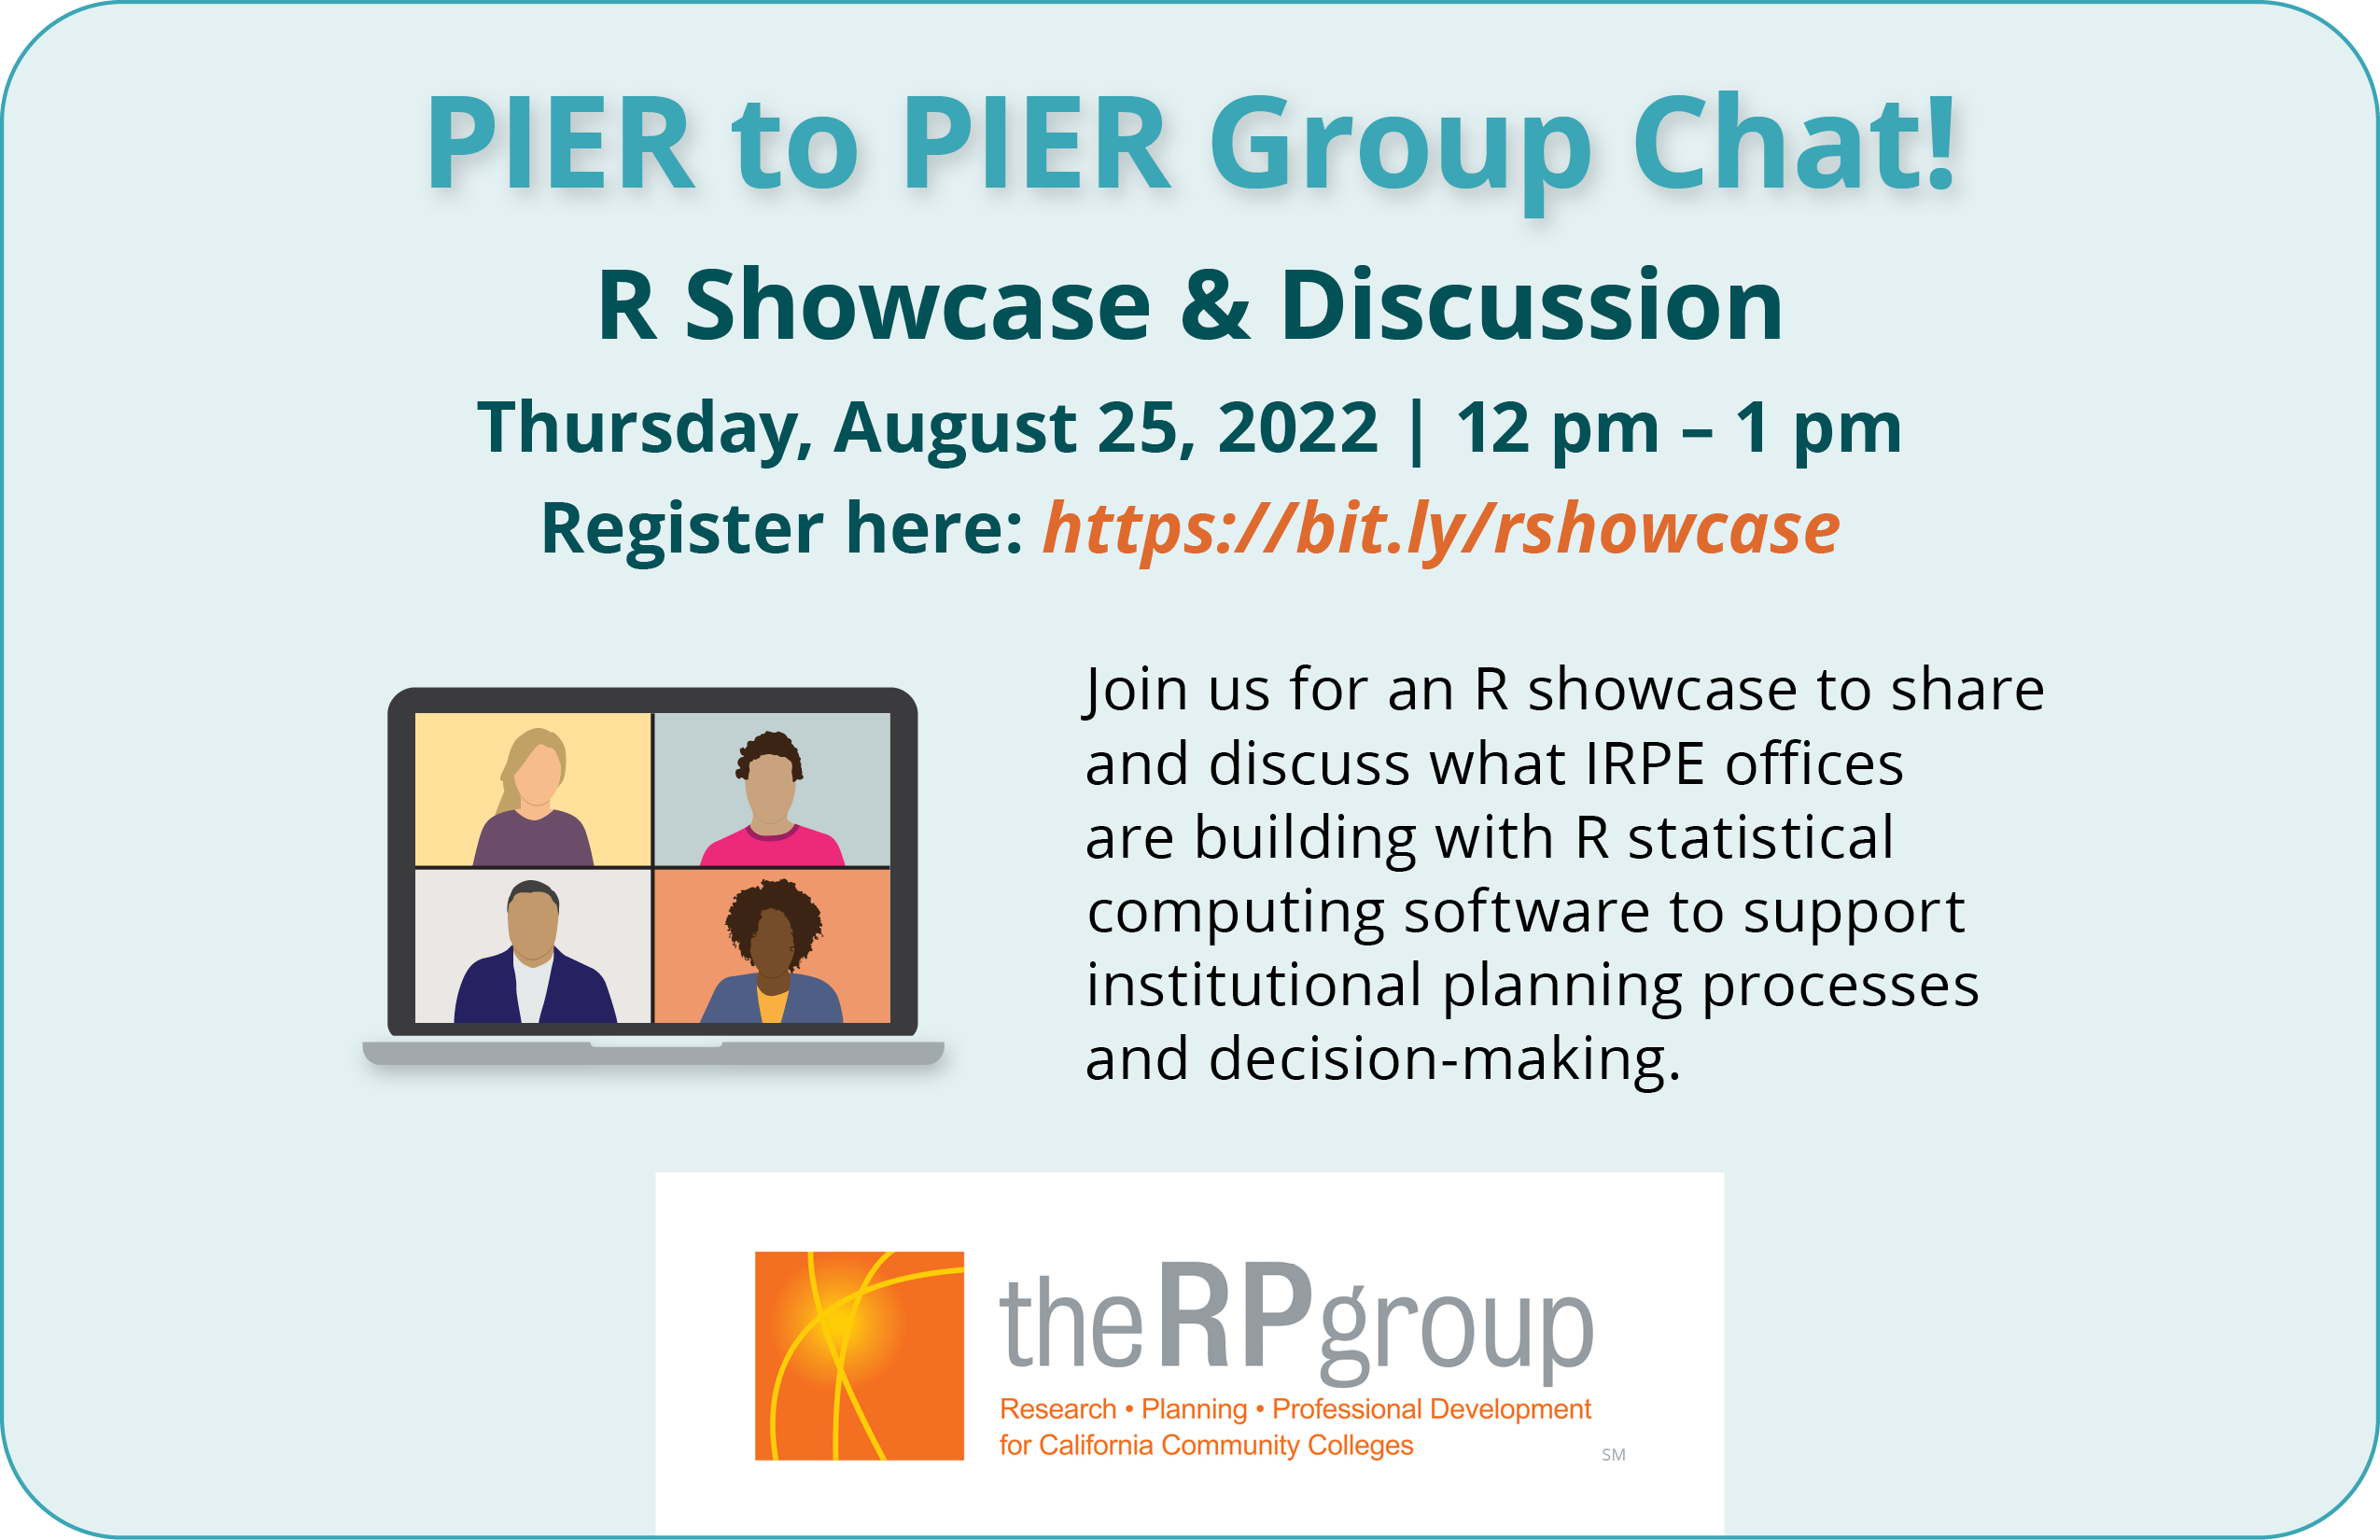 PIER to PIER Group Chat! Join us for an R showcase to share and discuss what IRPE offices are building with R statistical computing software to support institutional planning processes and decision-making. Thursday, August 25, 2022. 12 pm to 1 pm.